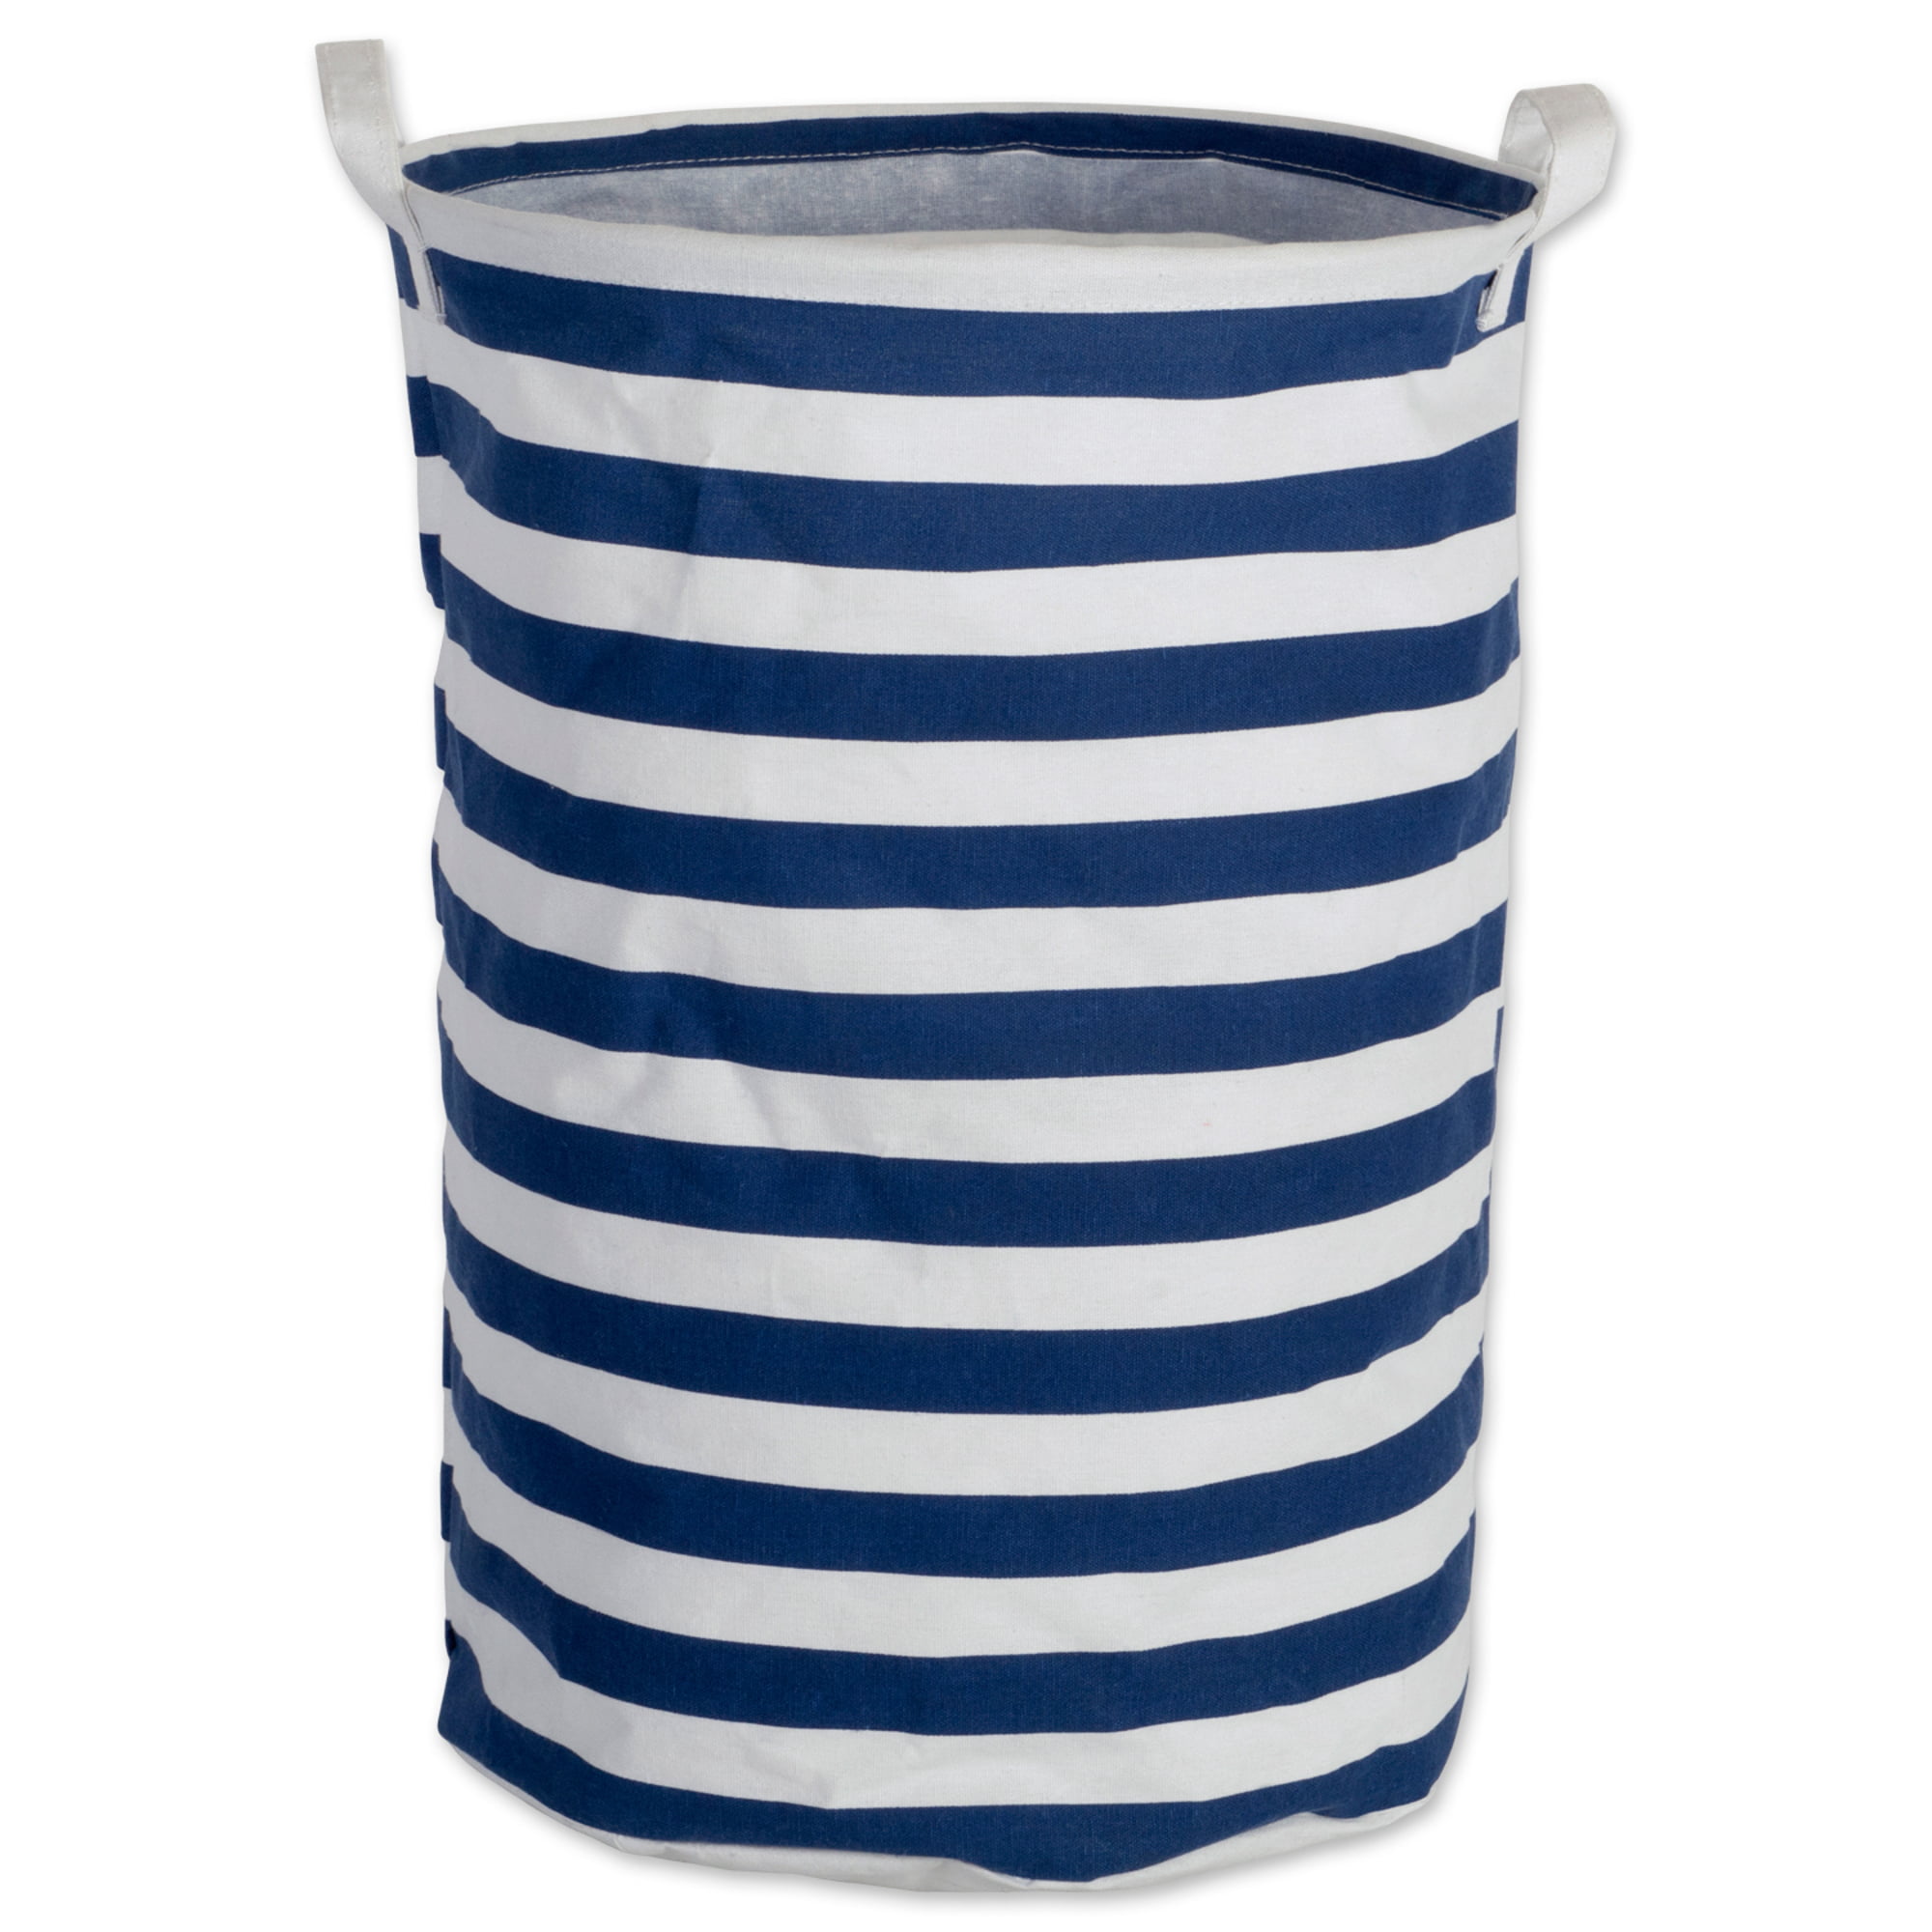 Closet 14 x 14 x 20 DII Cotton/Polyester Round Laundry Hamper or Basket Nursey Gray Rugby Stripe Perfect in Your Bedroom Dorm Laundry Room